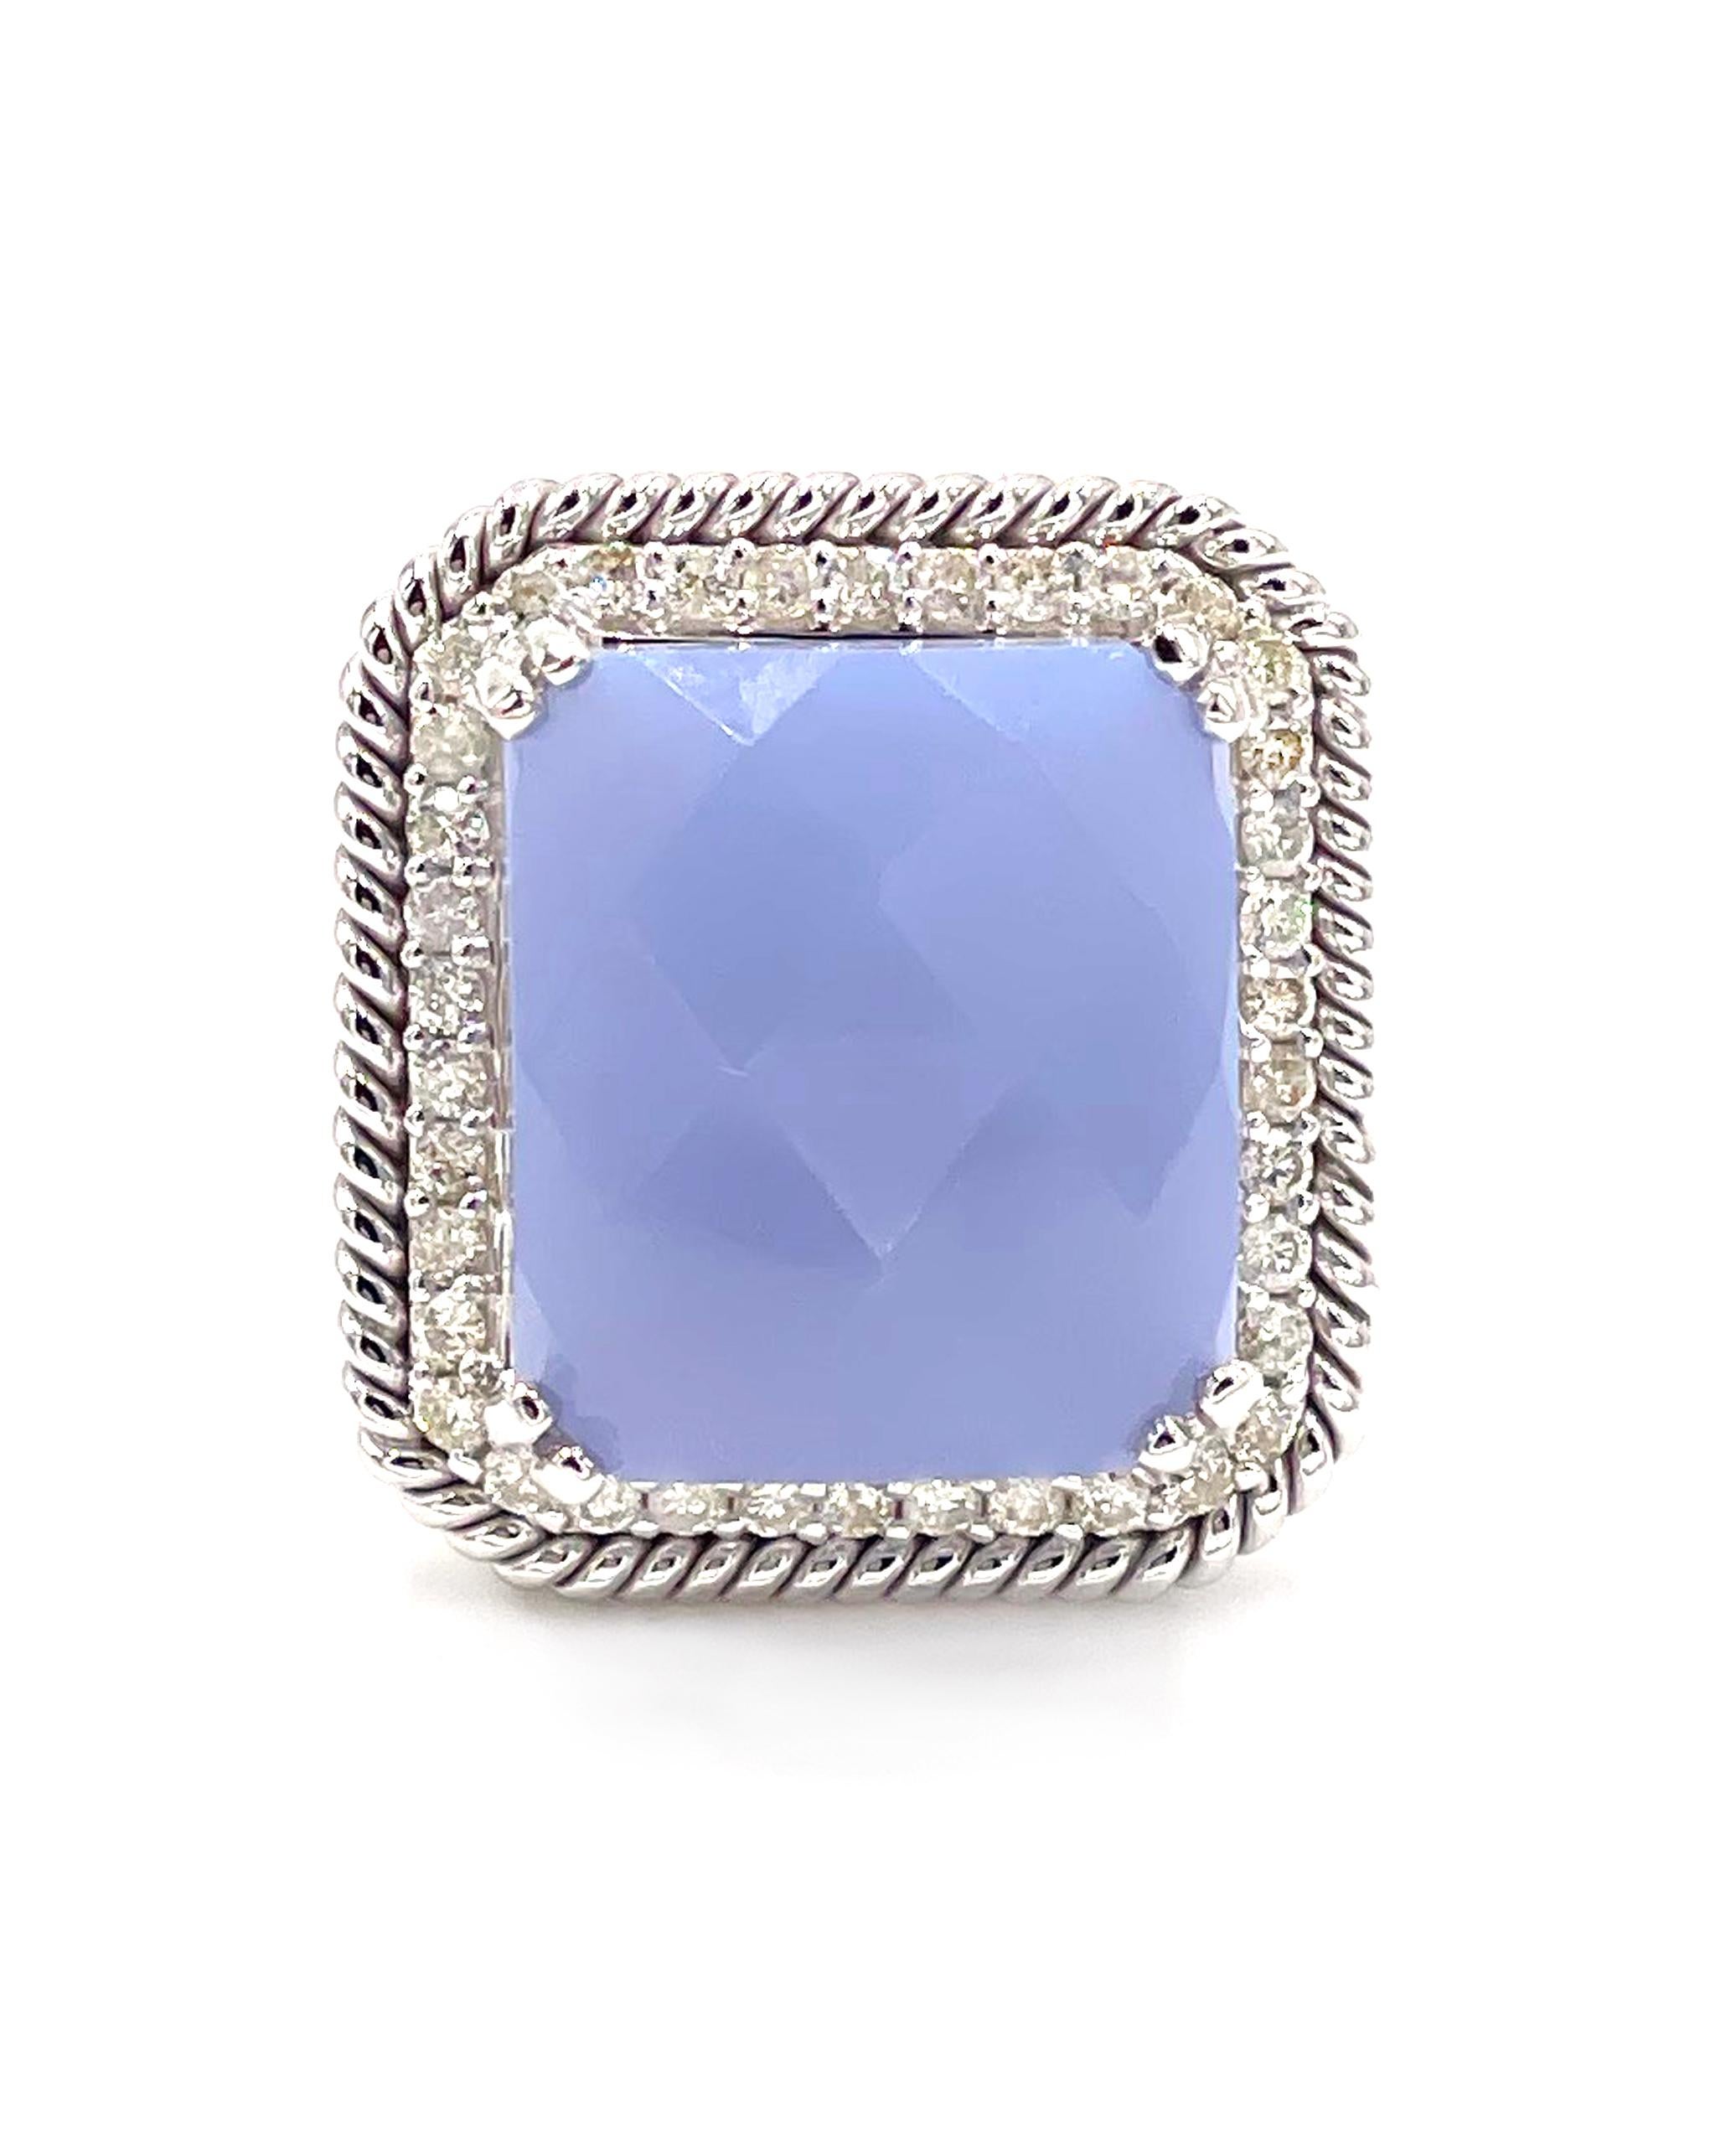 14K white gold ring with 40 round faceted diamonds 0.56 carats and one center rectangular faceted chalcedony 15.4x13.4mm.

* Finger size 6.5